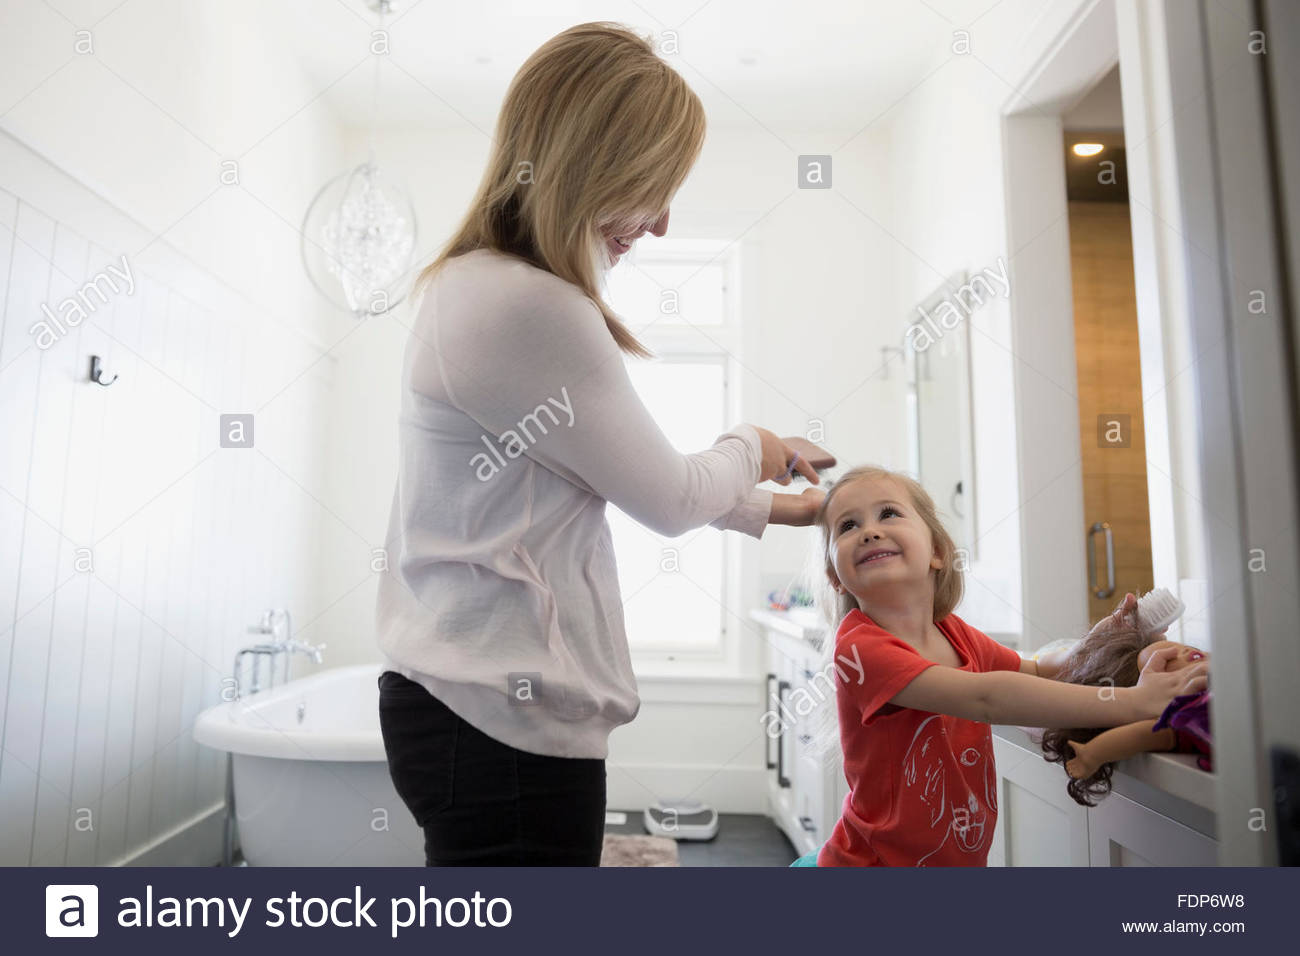 mother brushing daughters hair bathroom Stock Photo